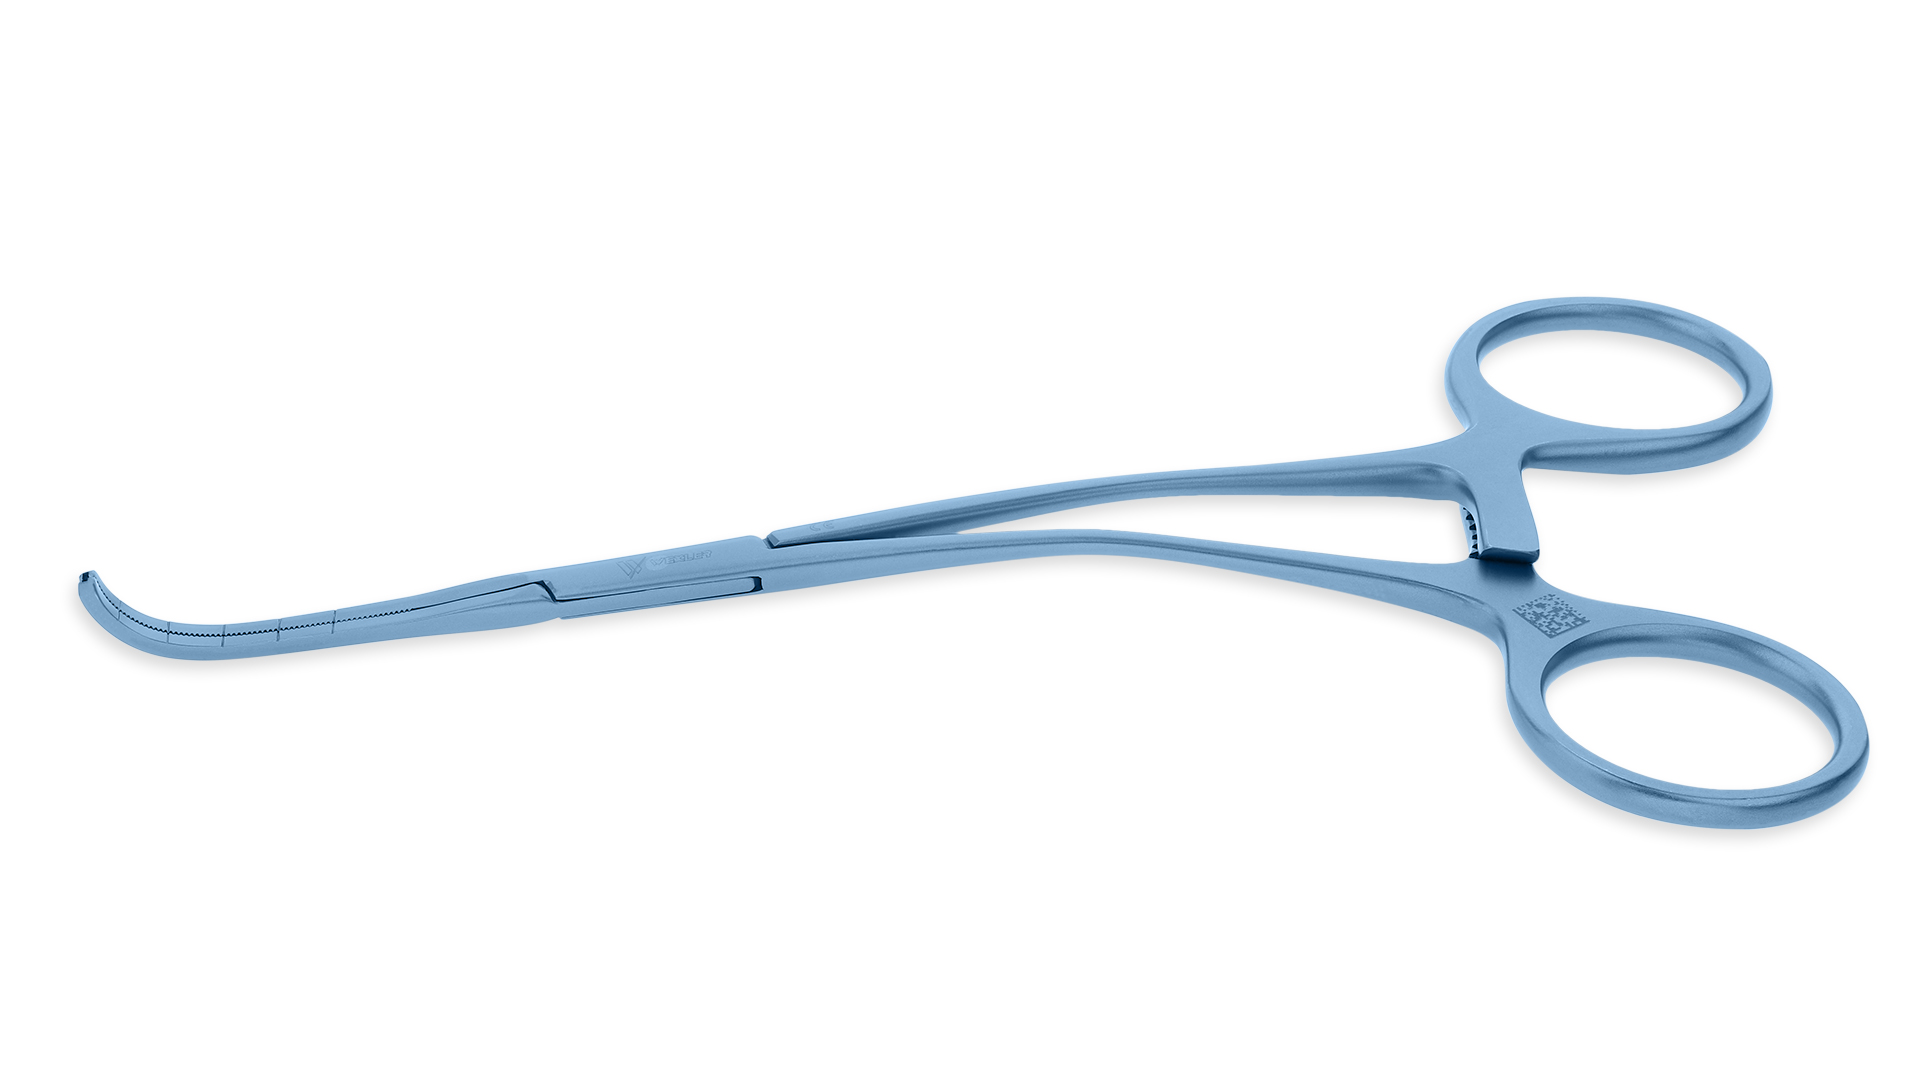 Castaneda Clamp - Slightly Curved Cooley Atraumatic jaws